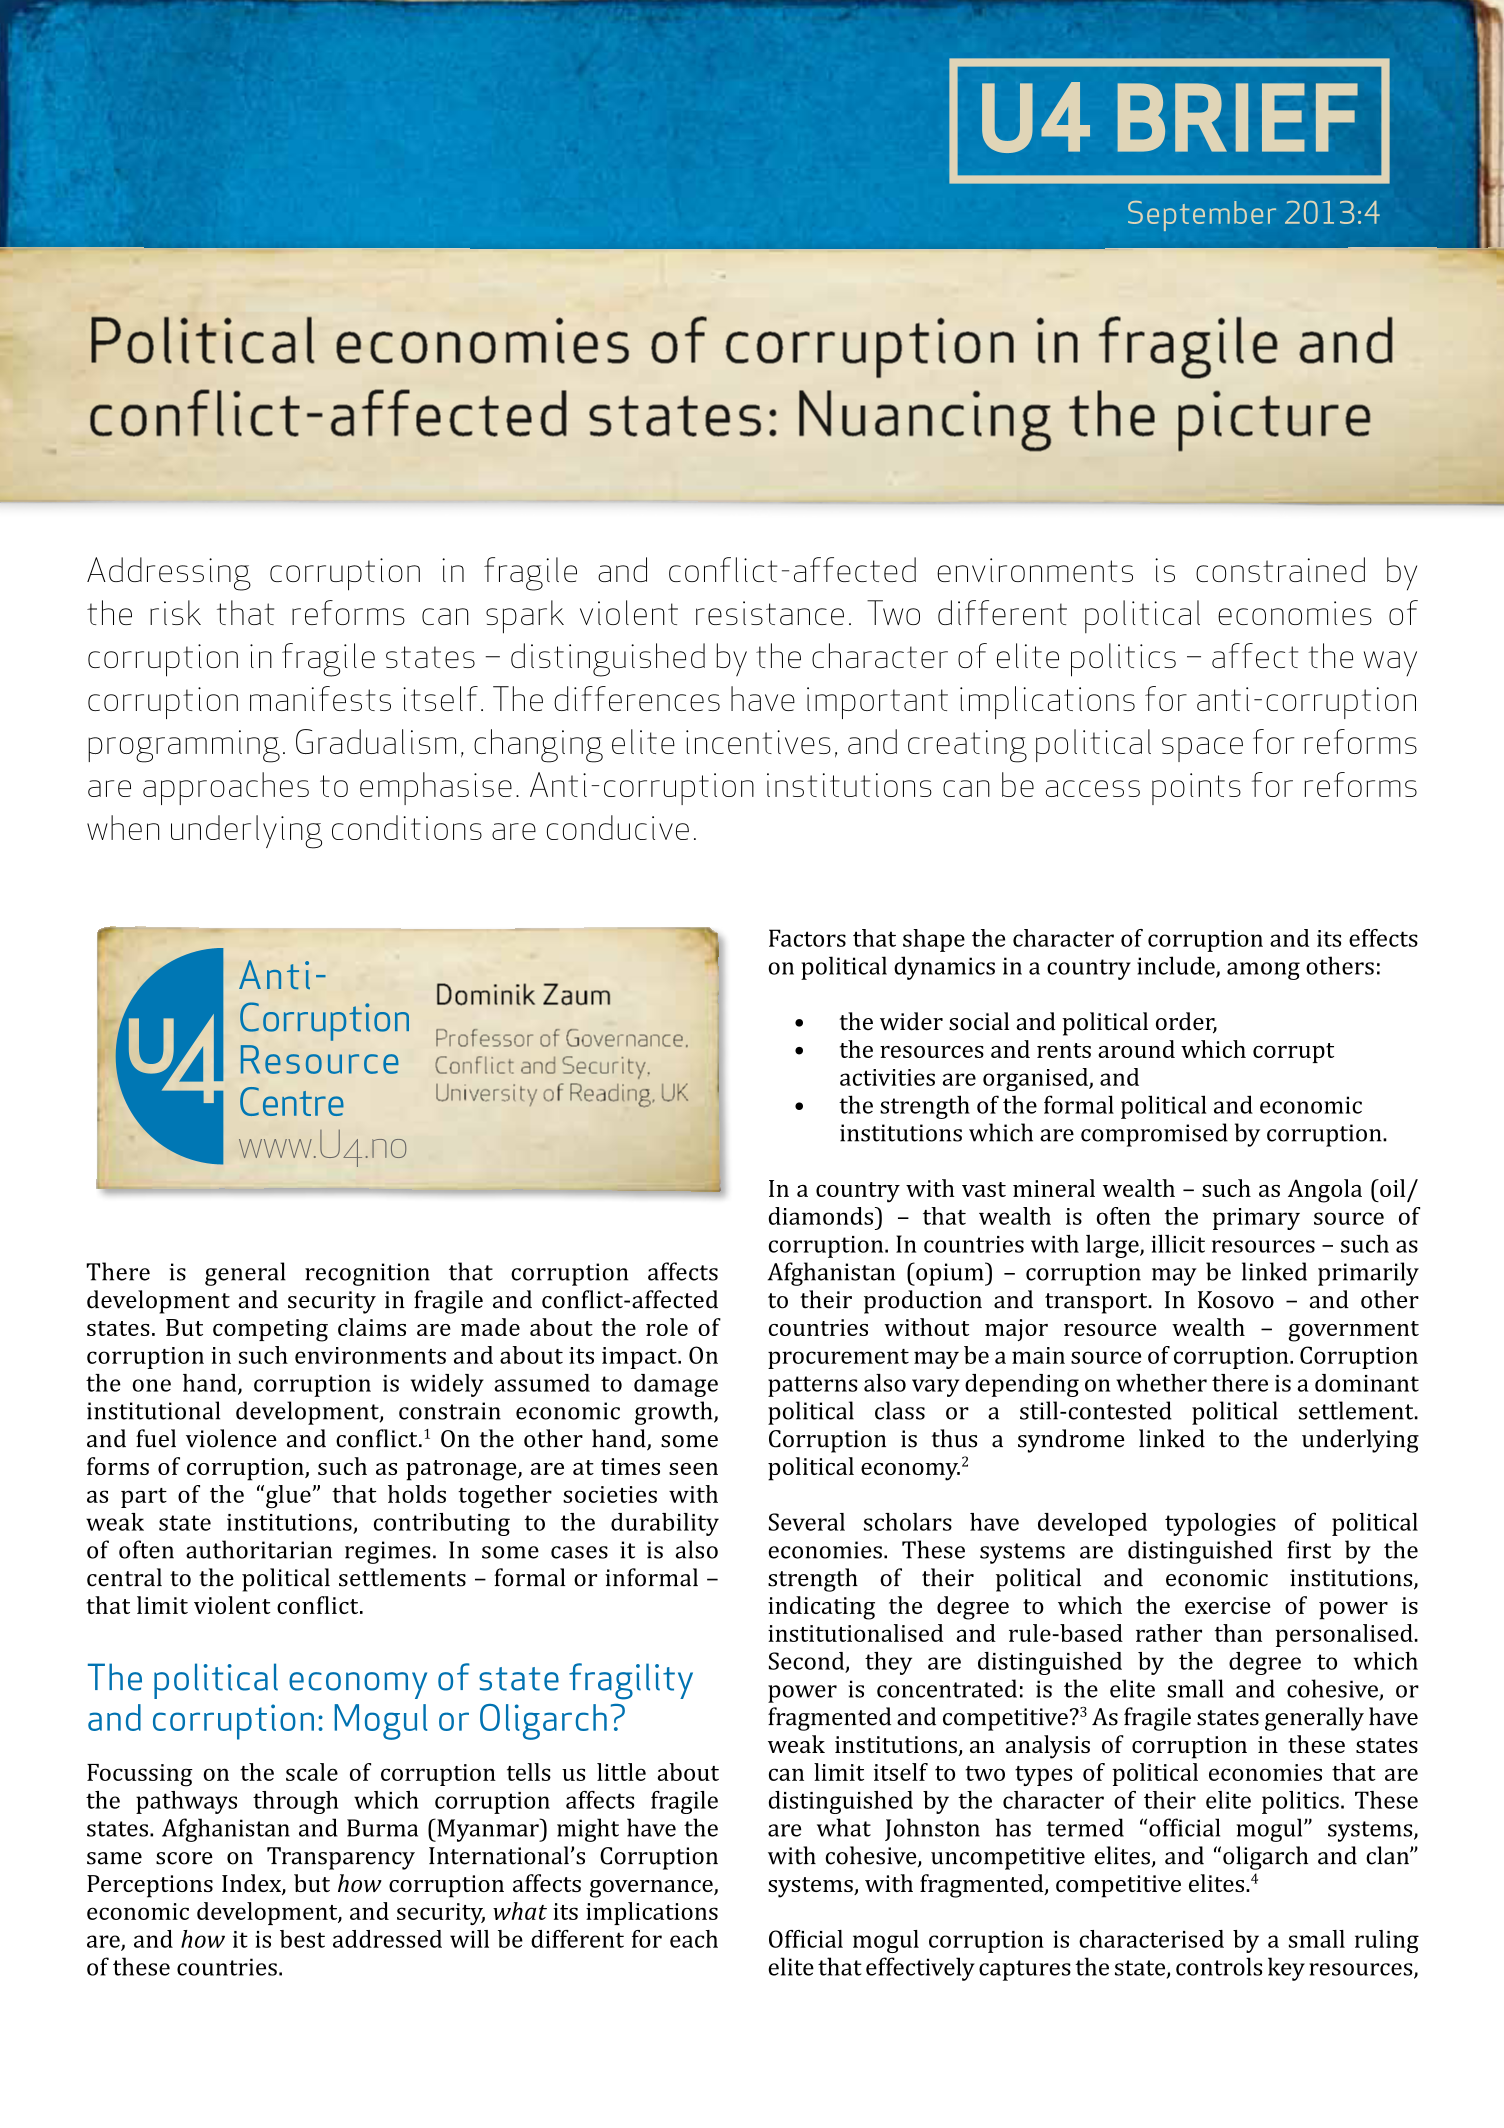 Political economies of corruption in fragile and conflict-affected states: Nuancing the picture